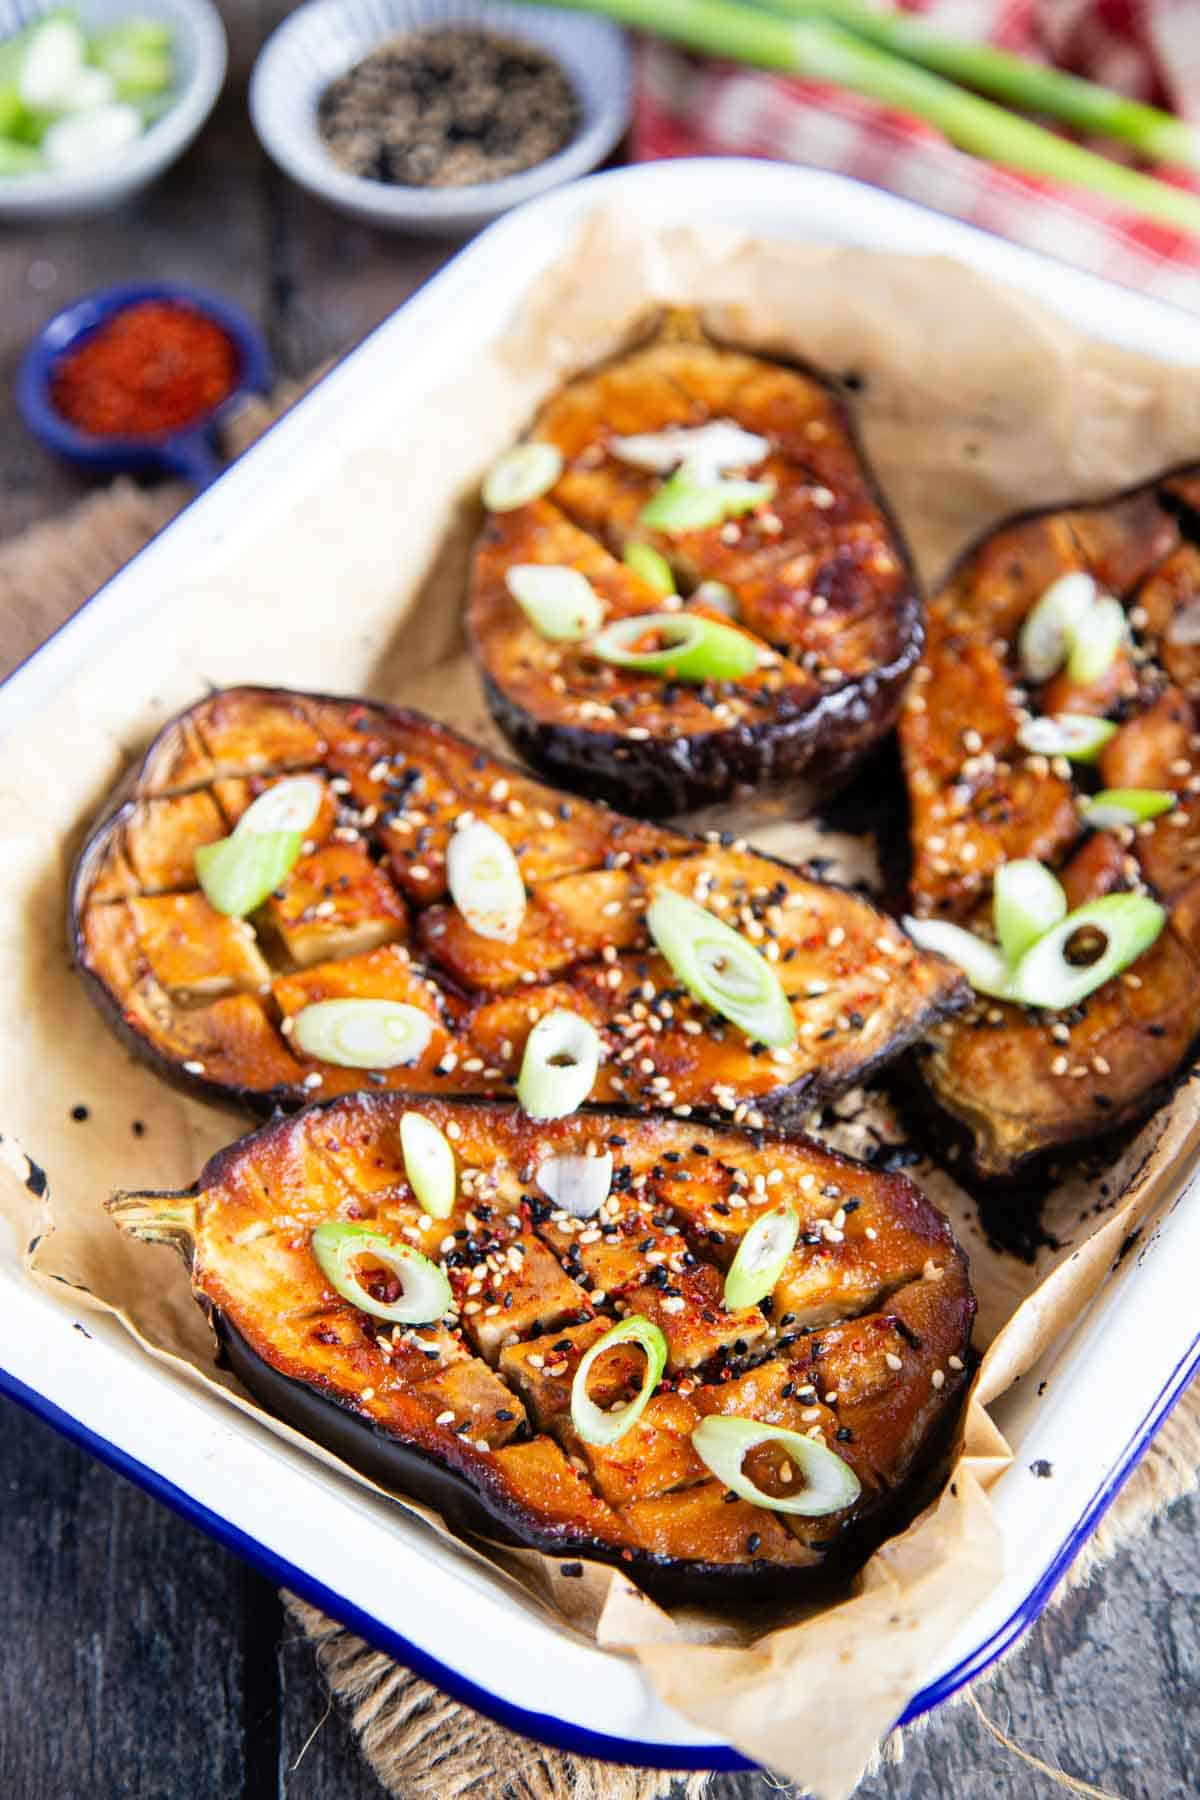 Miso aubergine served from oven to table.